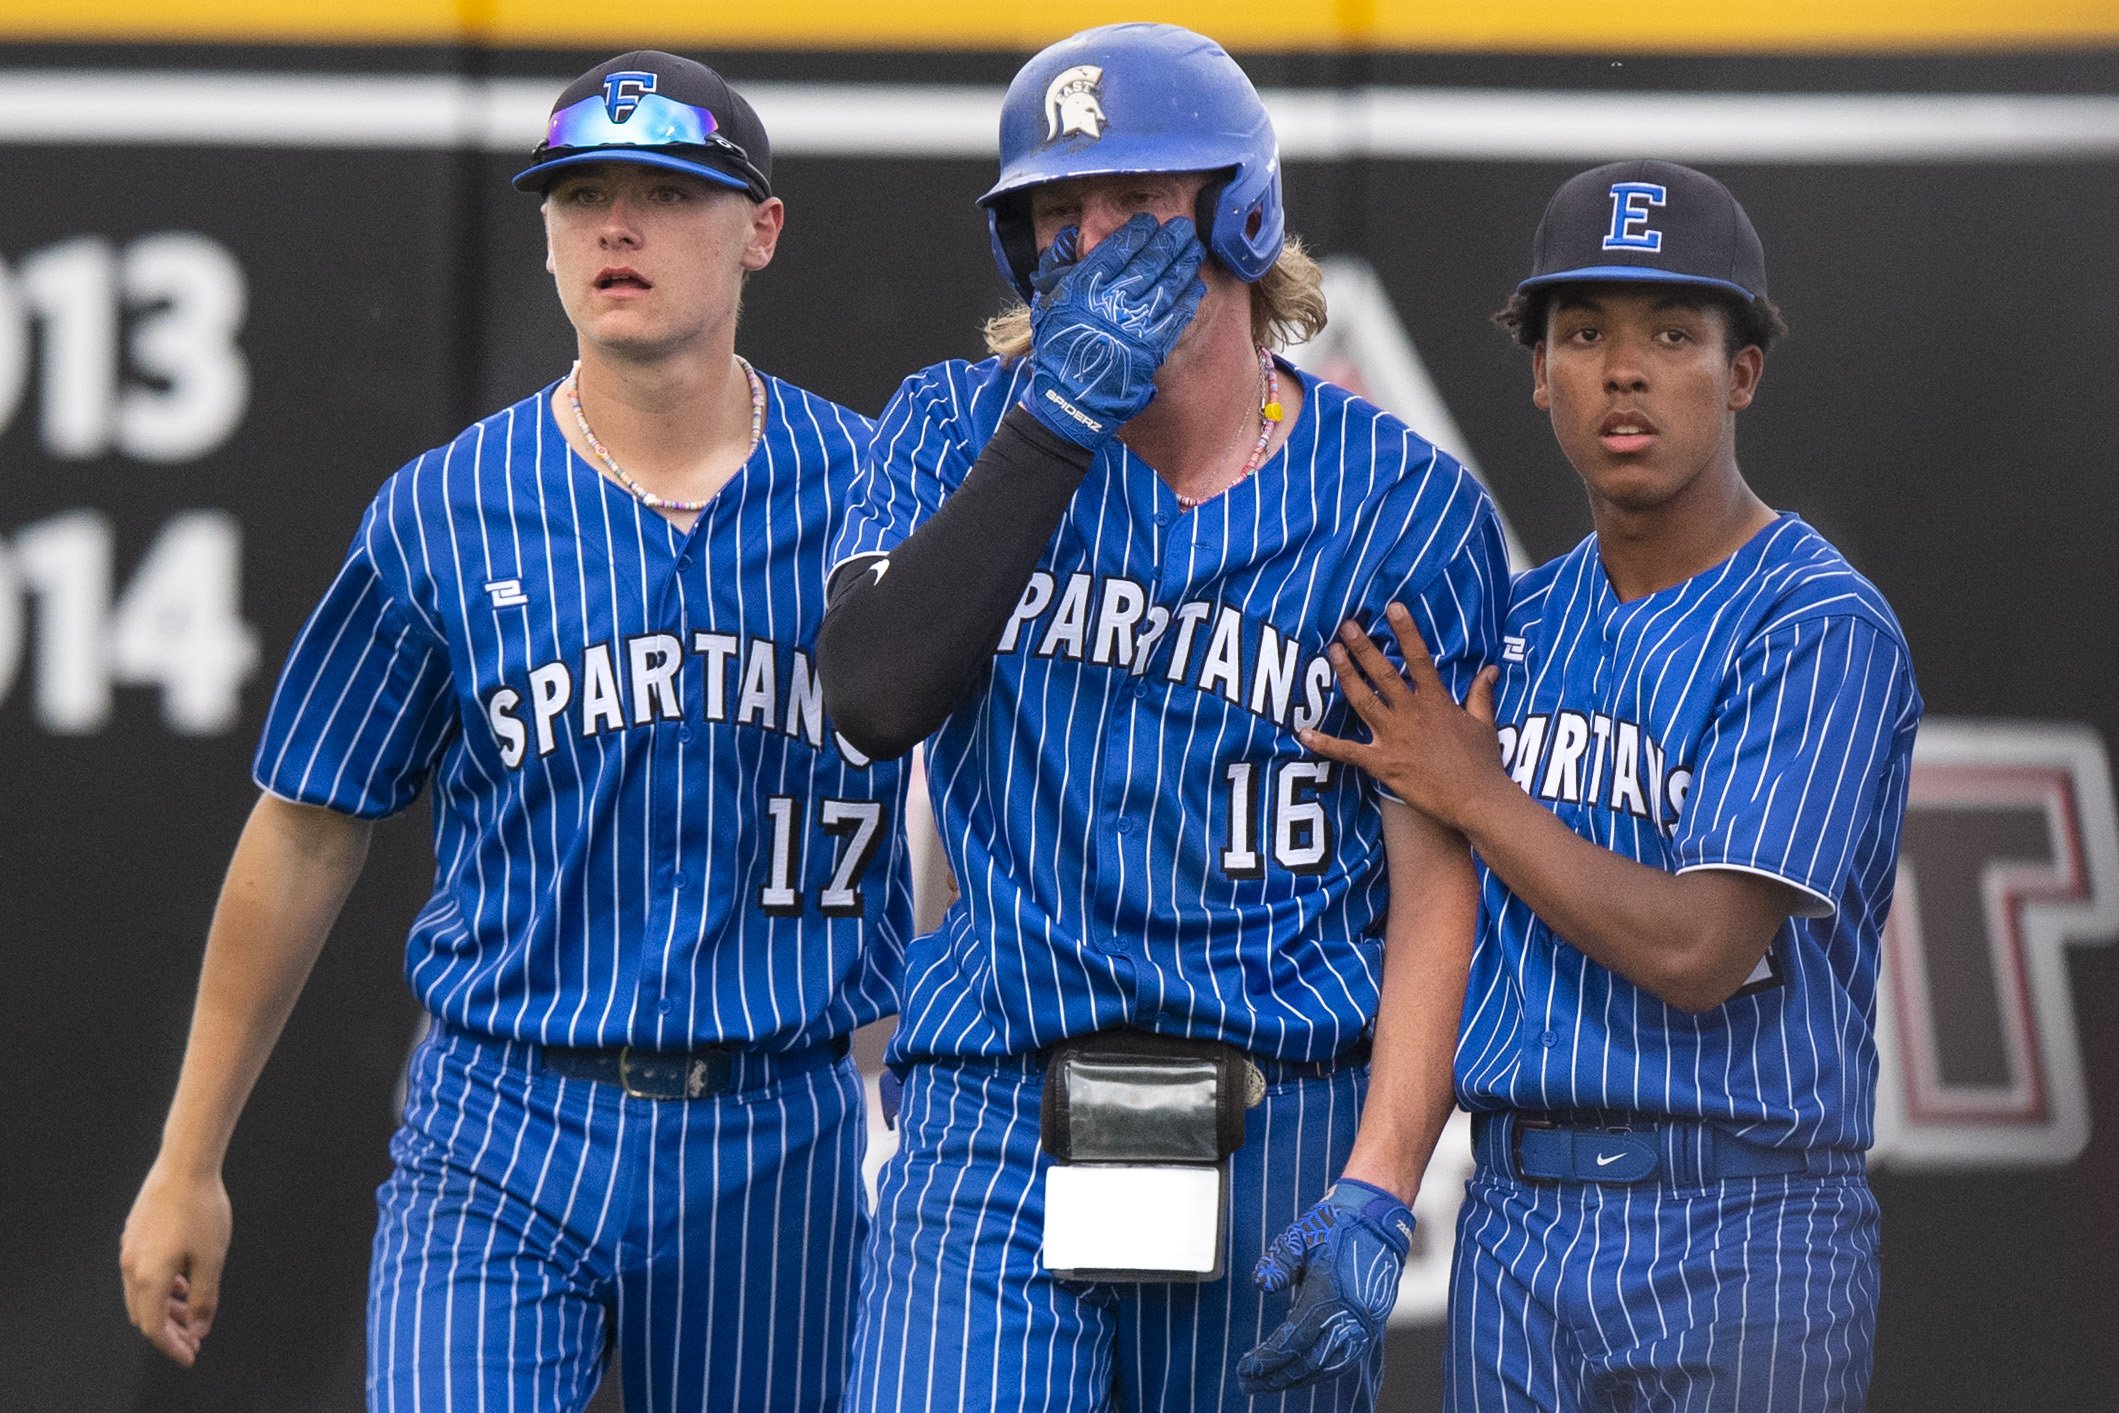  Cooper Erikson (center) is consoled  by his teammates Eli Eriksons (left) and Jaelyn Worthley after losing to Millard West in the Class A semifinal game at Tal Anderson Field on May 19, 2022, in Omaha , Nebraska. 